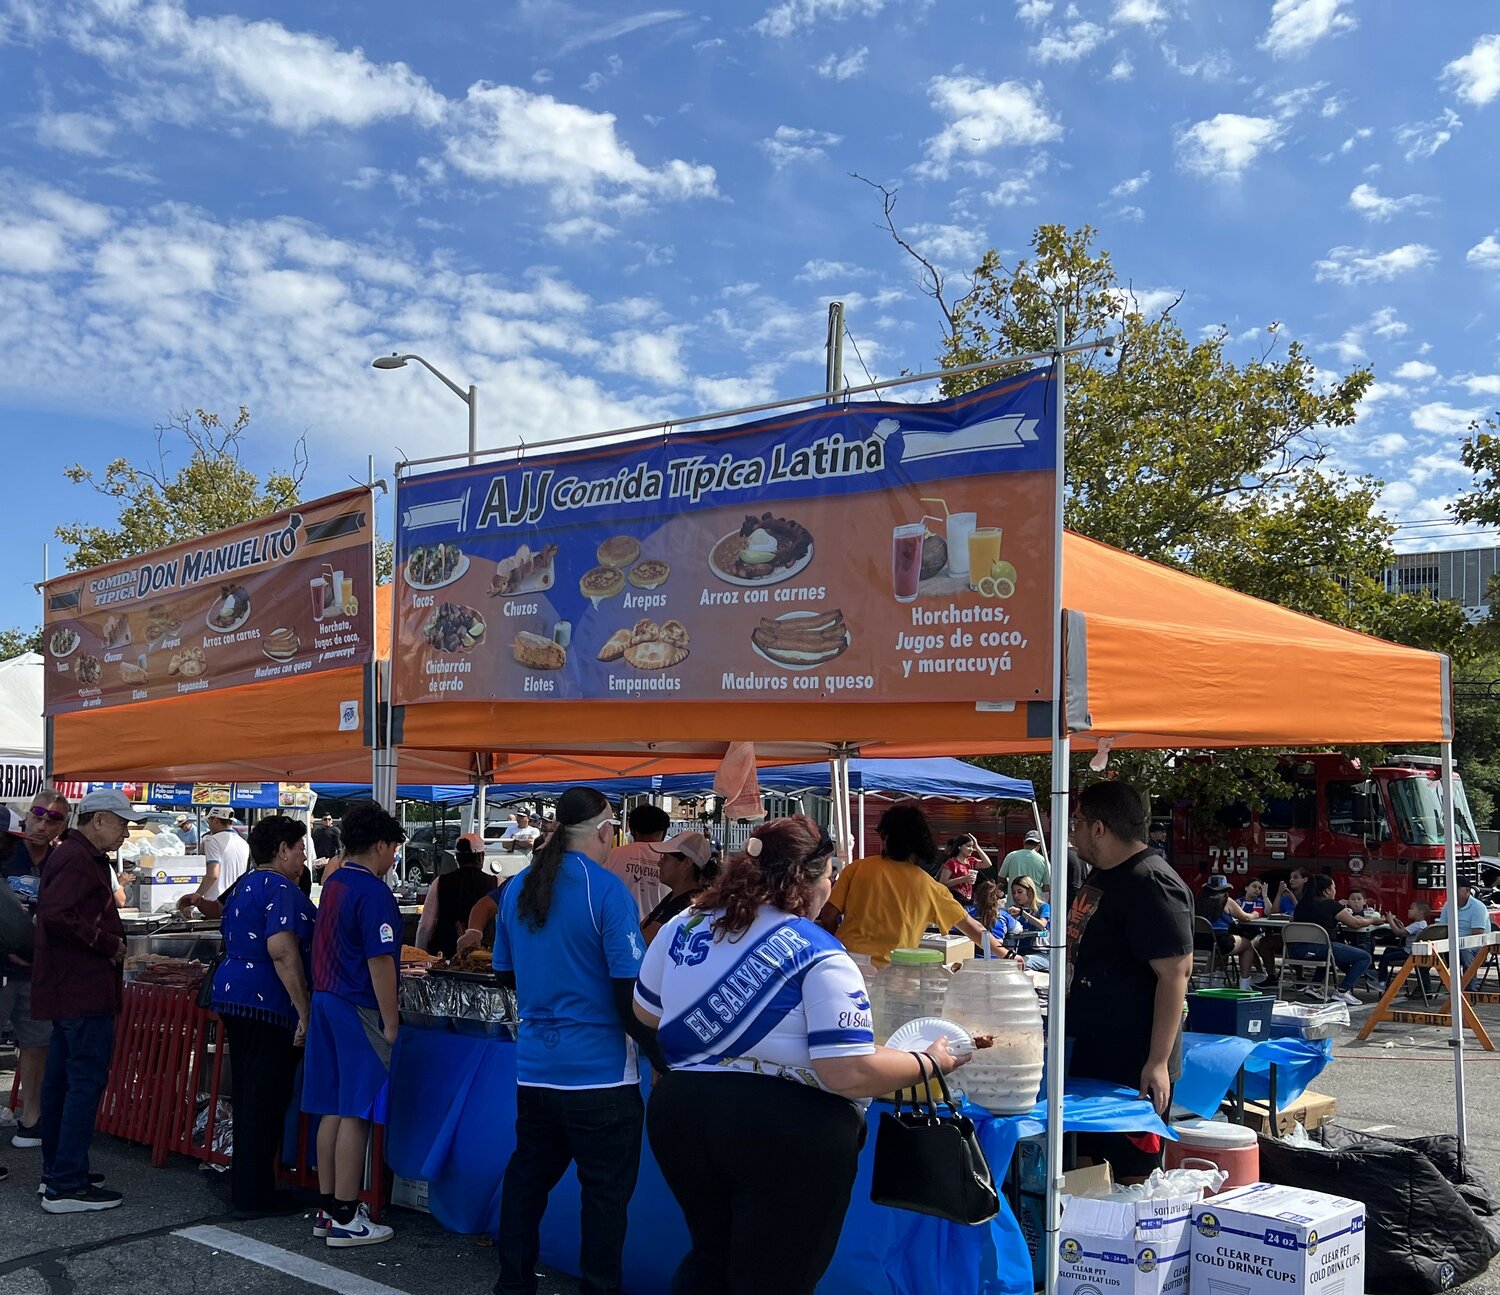 Among the festival’s attractions were the Central American food stands that ringed the Town of Hempstead parking lot.